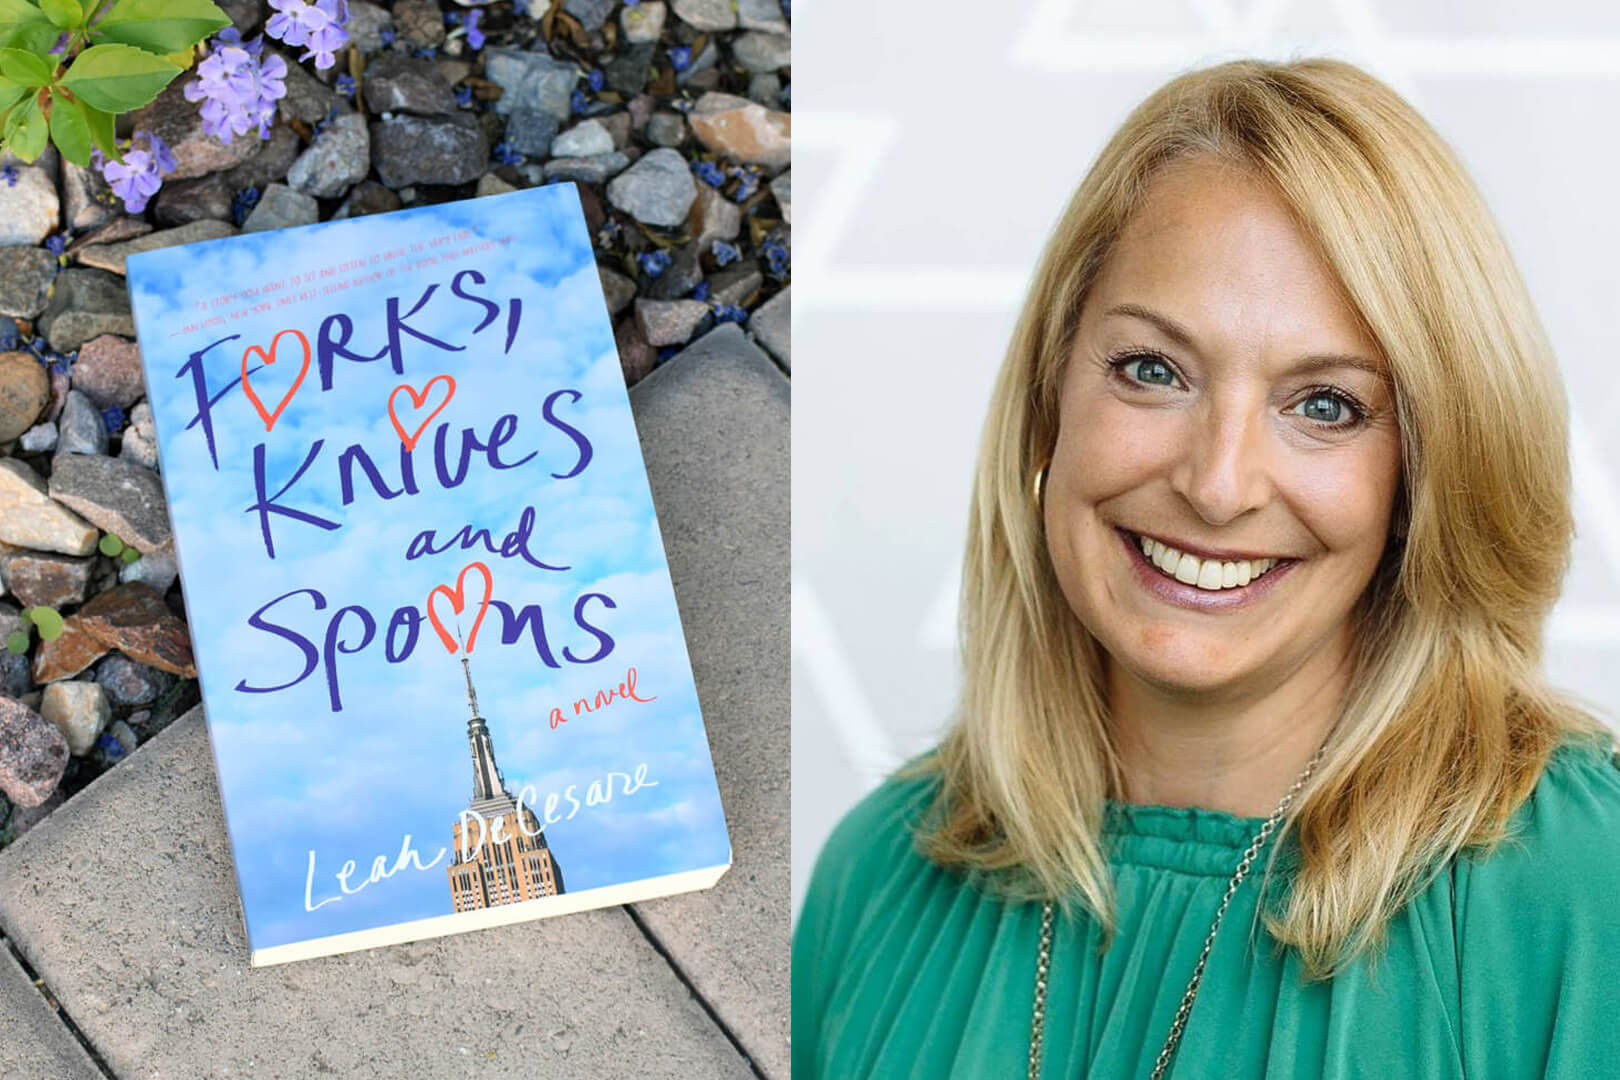 Q&A with Leah DeCesare, Author of Forks, Knives, and Spoons